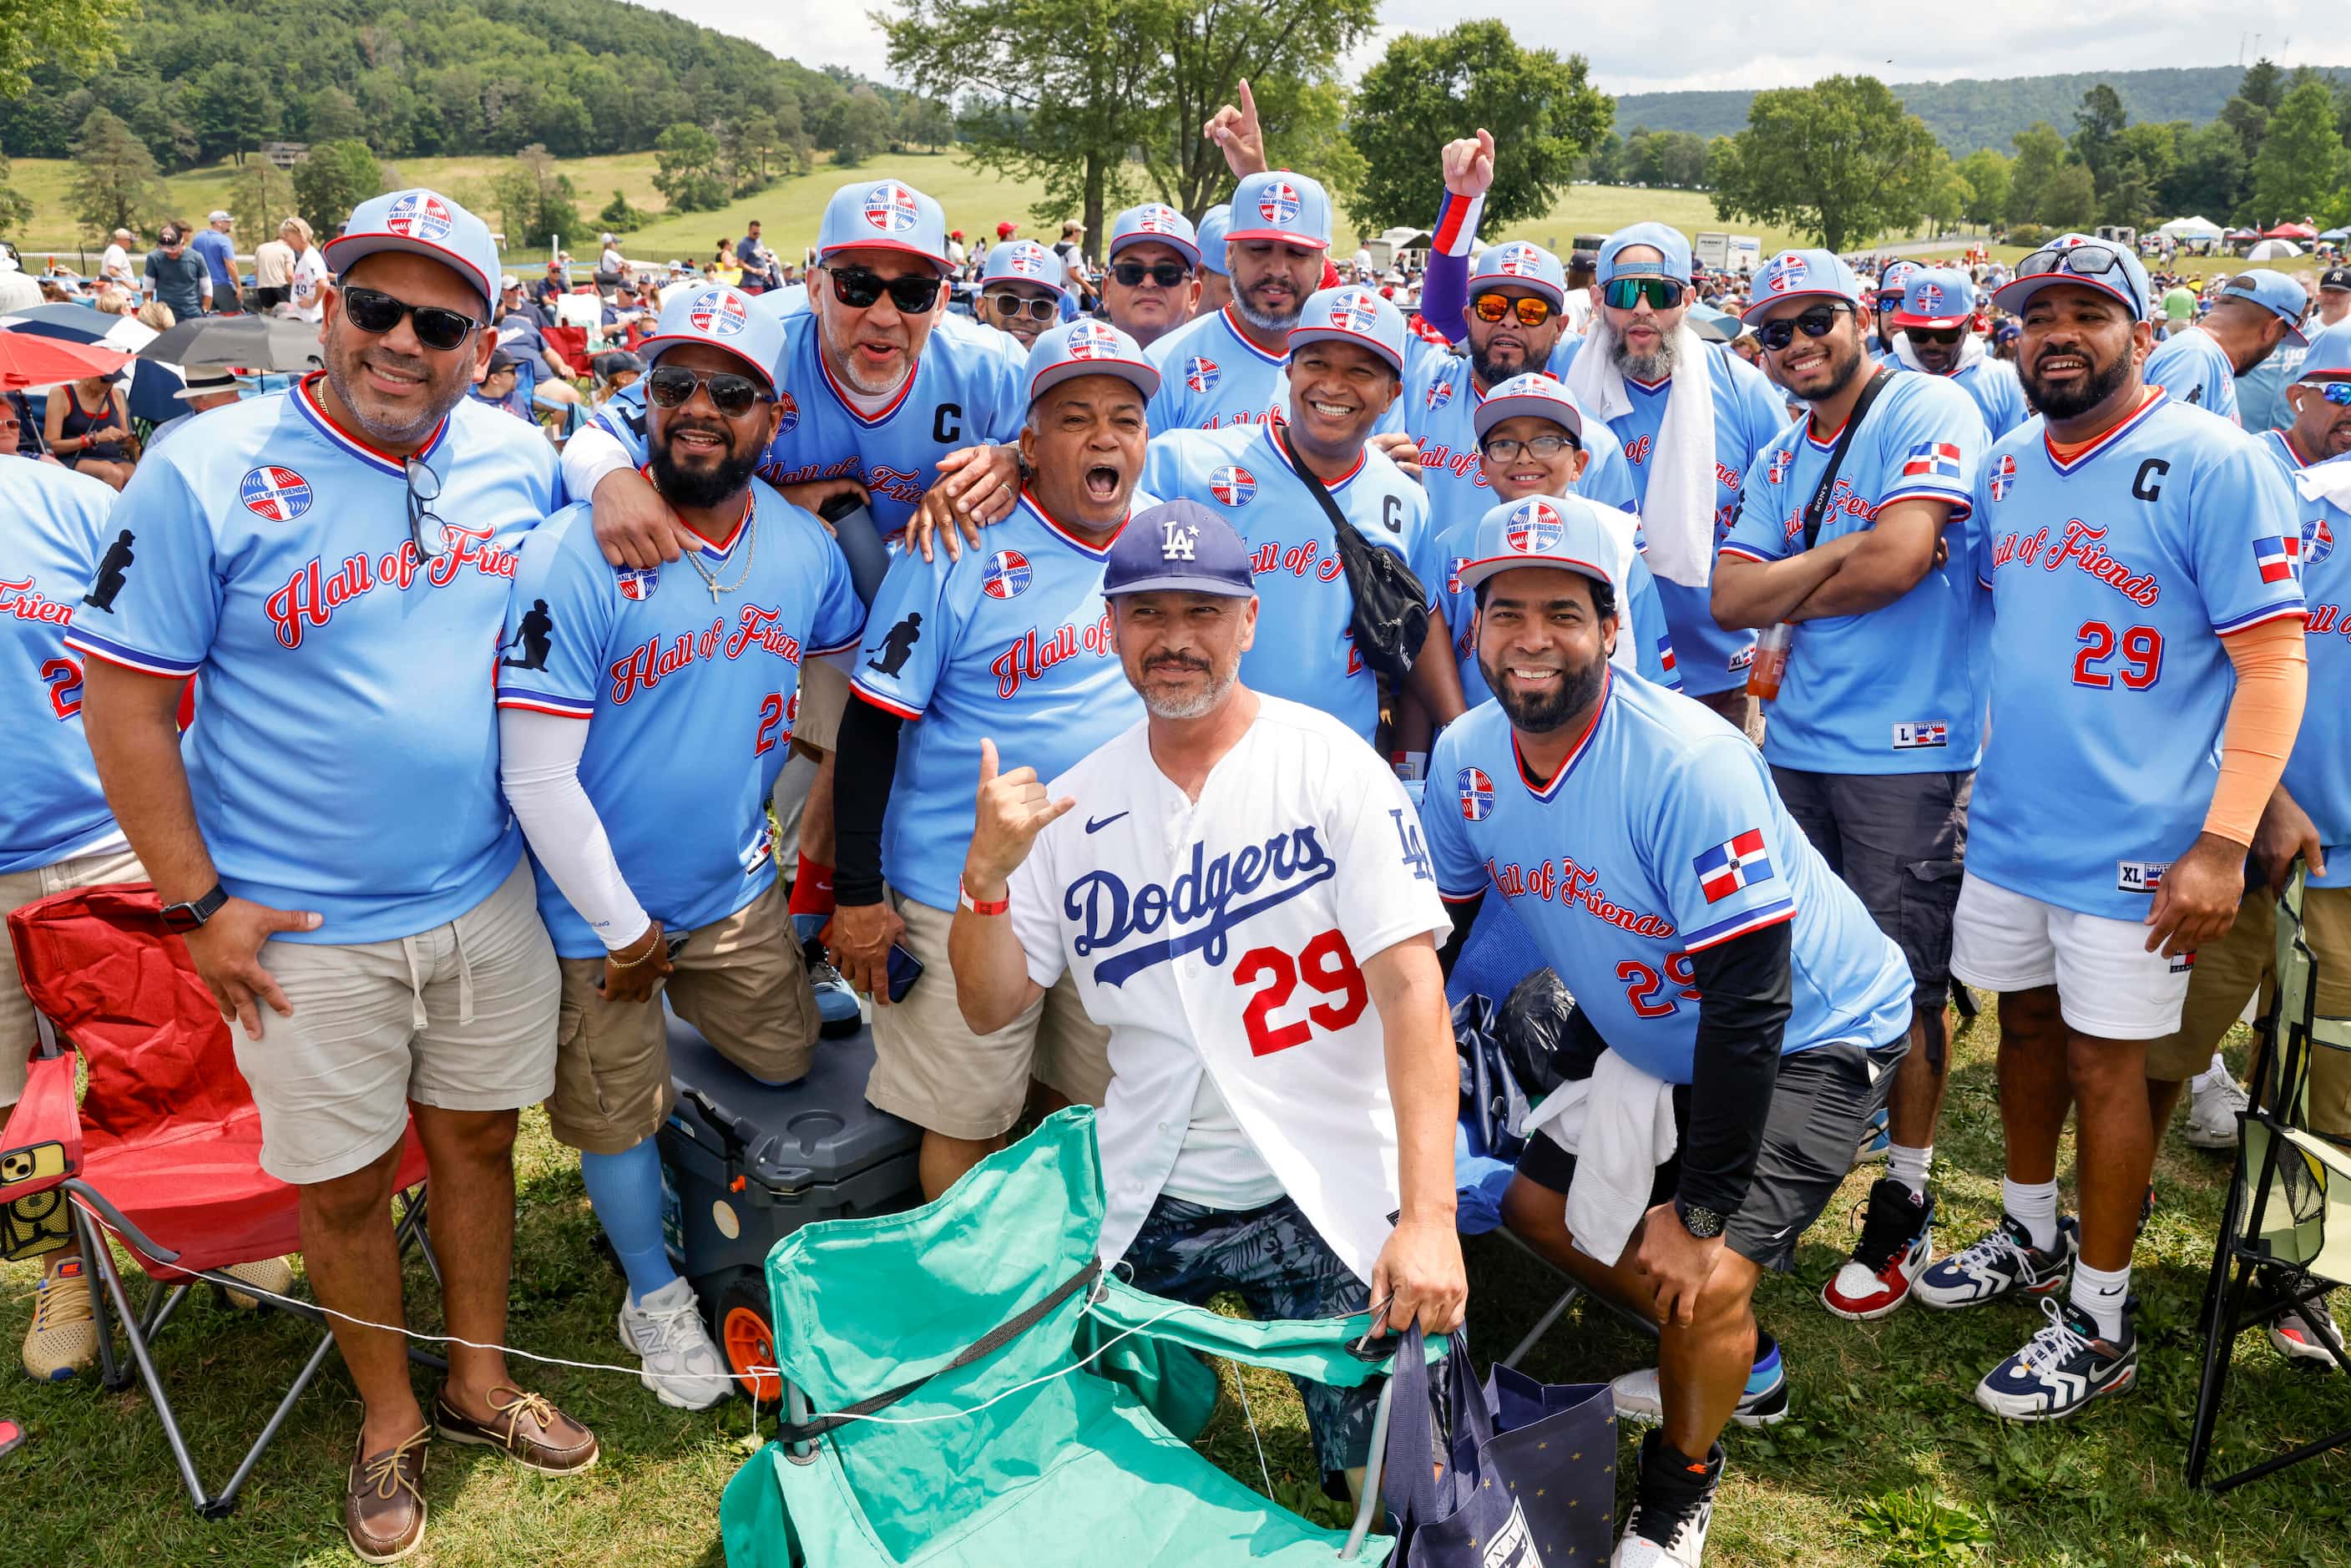 A group of baseball aficionados known as the “Hall of Friends” wear themed shirts for former...